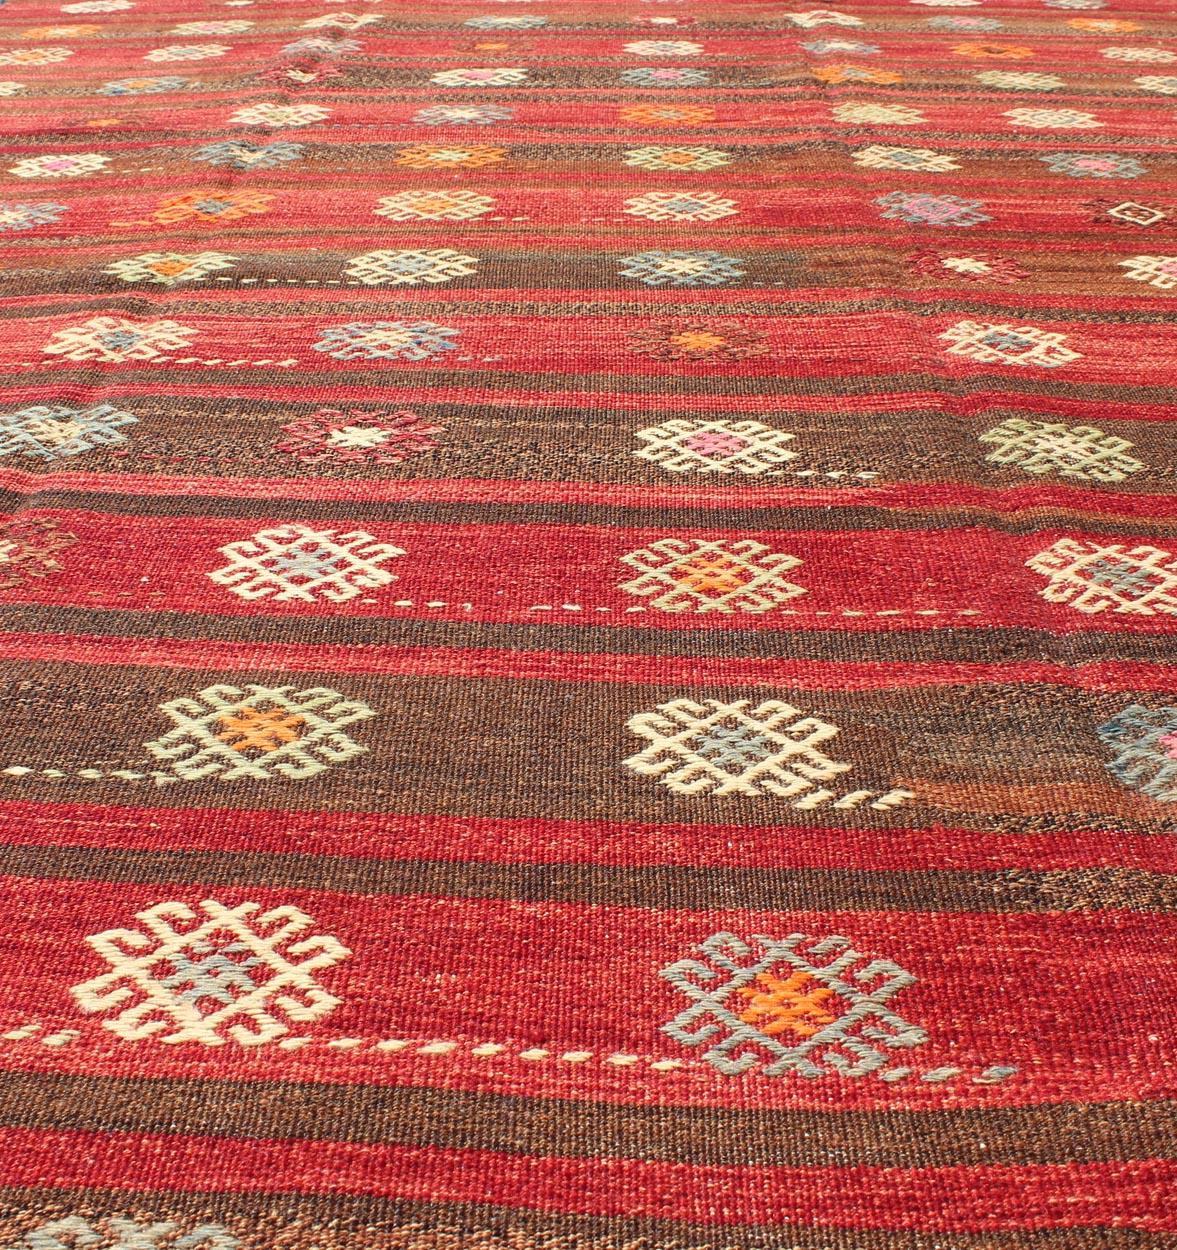 Red and Brown Striped Turkish Hand Woven Kilim Rug with Geometric Shapes For Sale 2